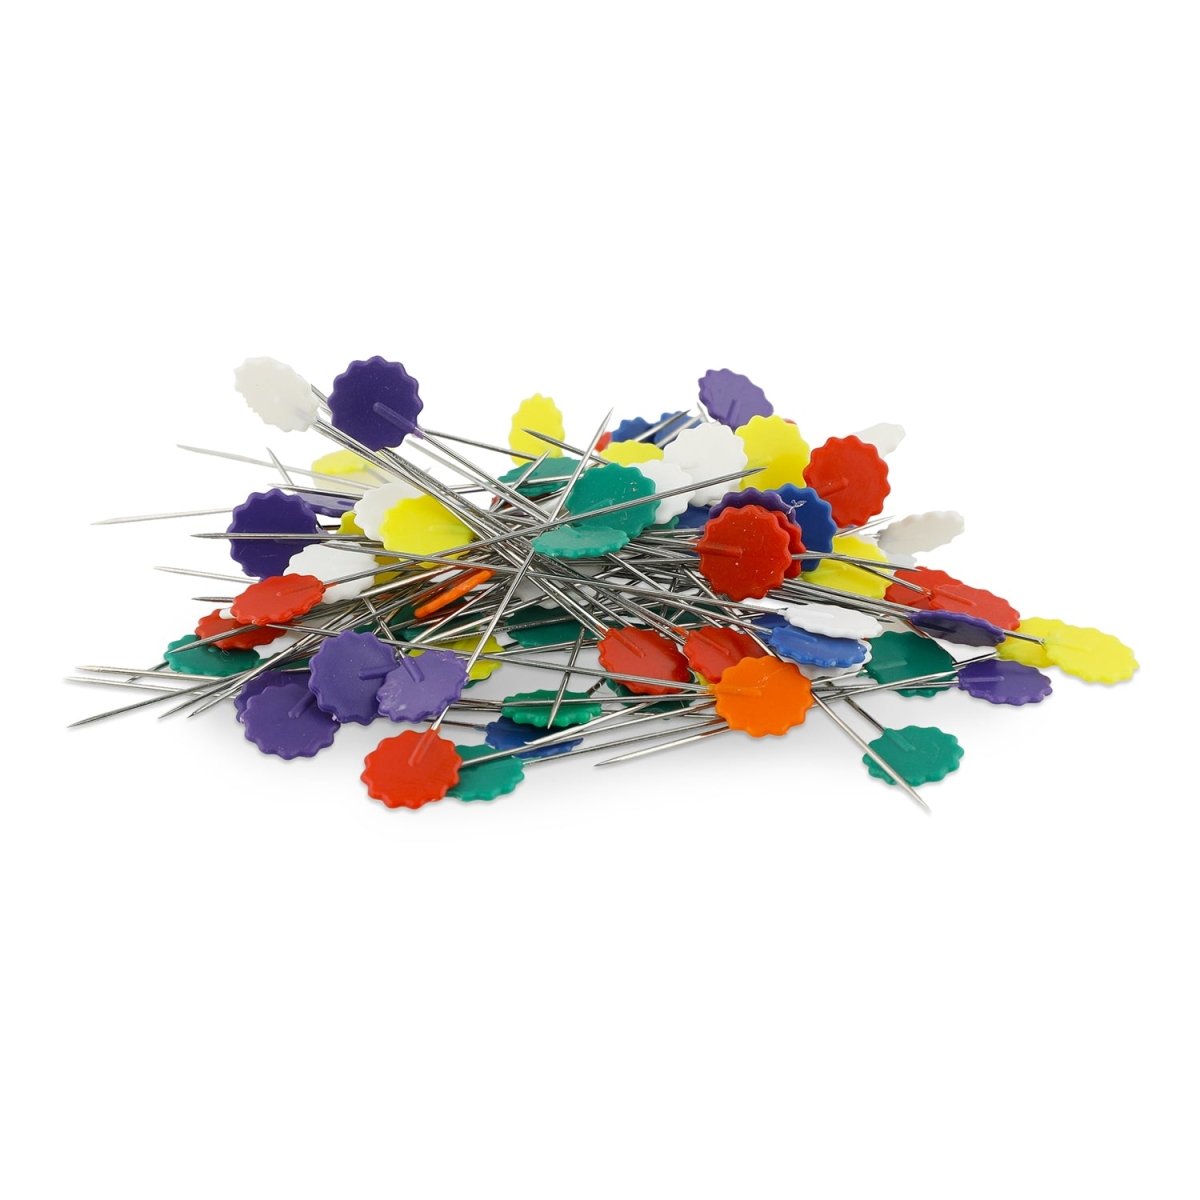 Long Flower Pins - 200 Pack - 7 Bright Colors – MadamSew